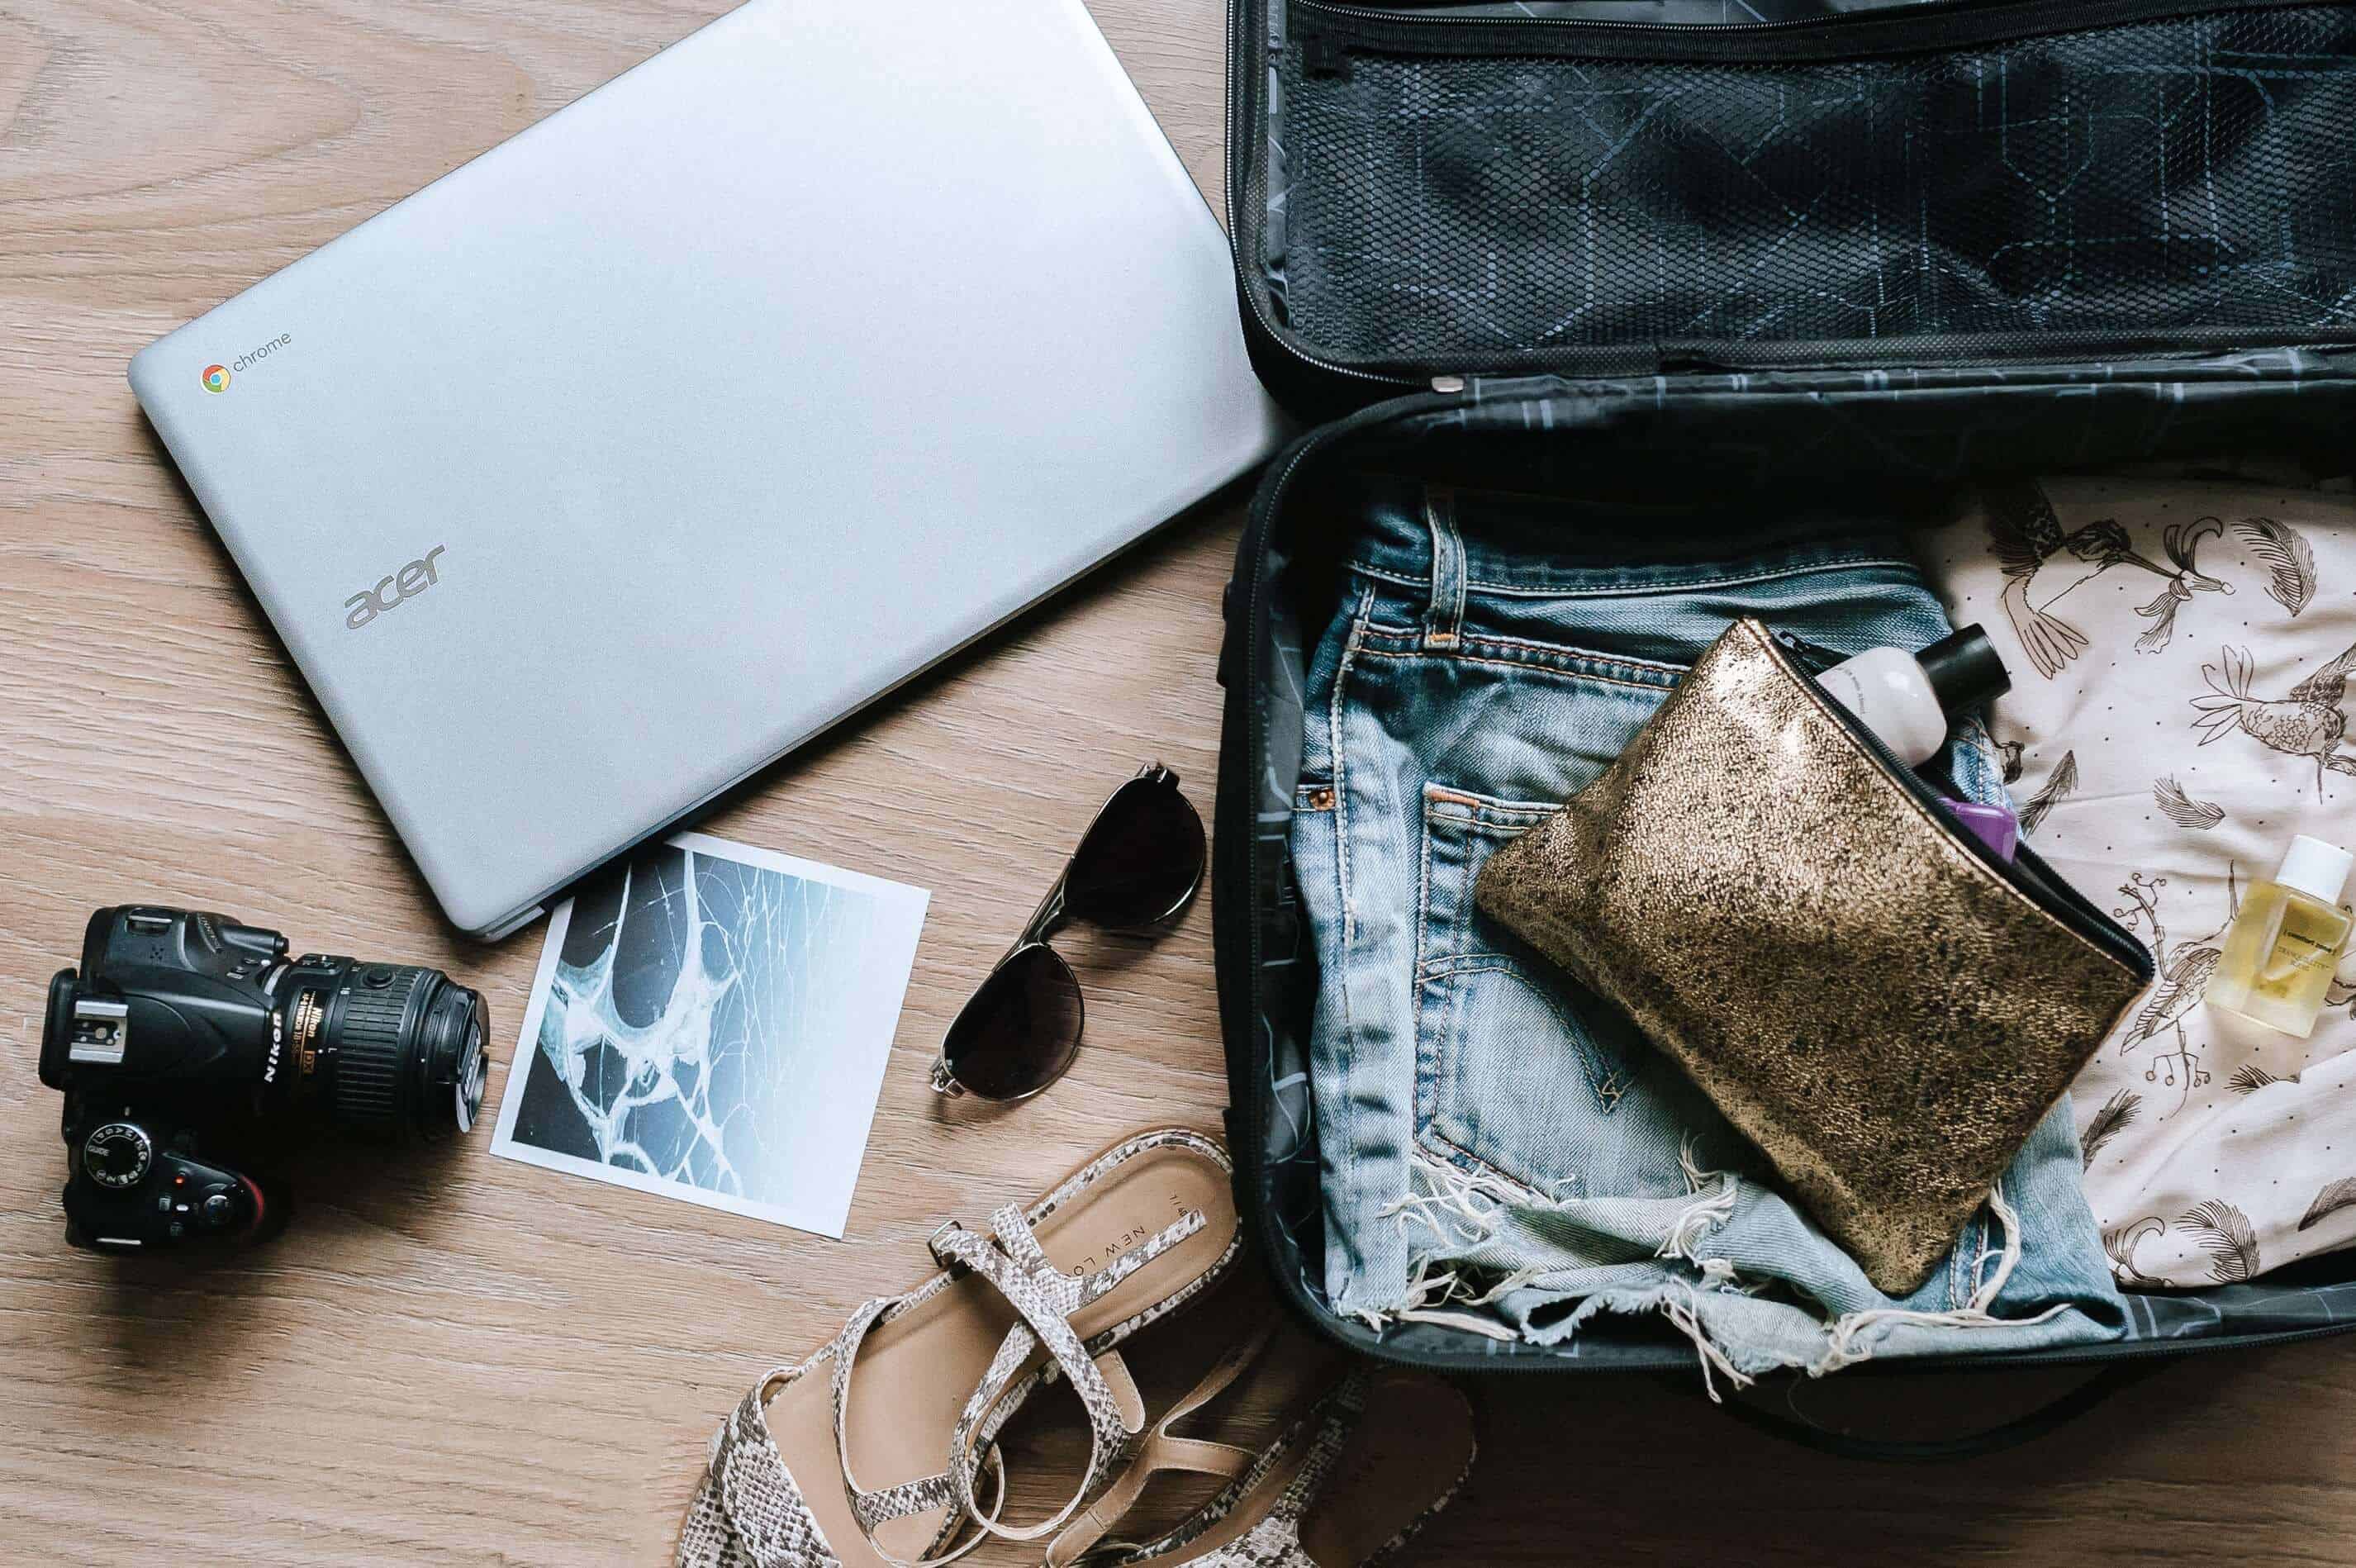 PackPoint helps you remember everything you need to pack for a trip!